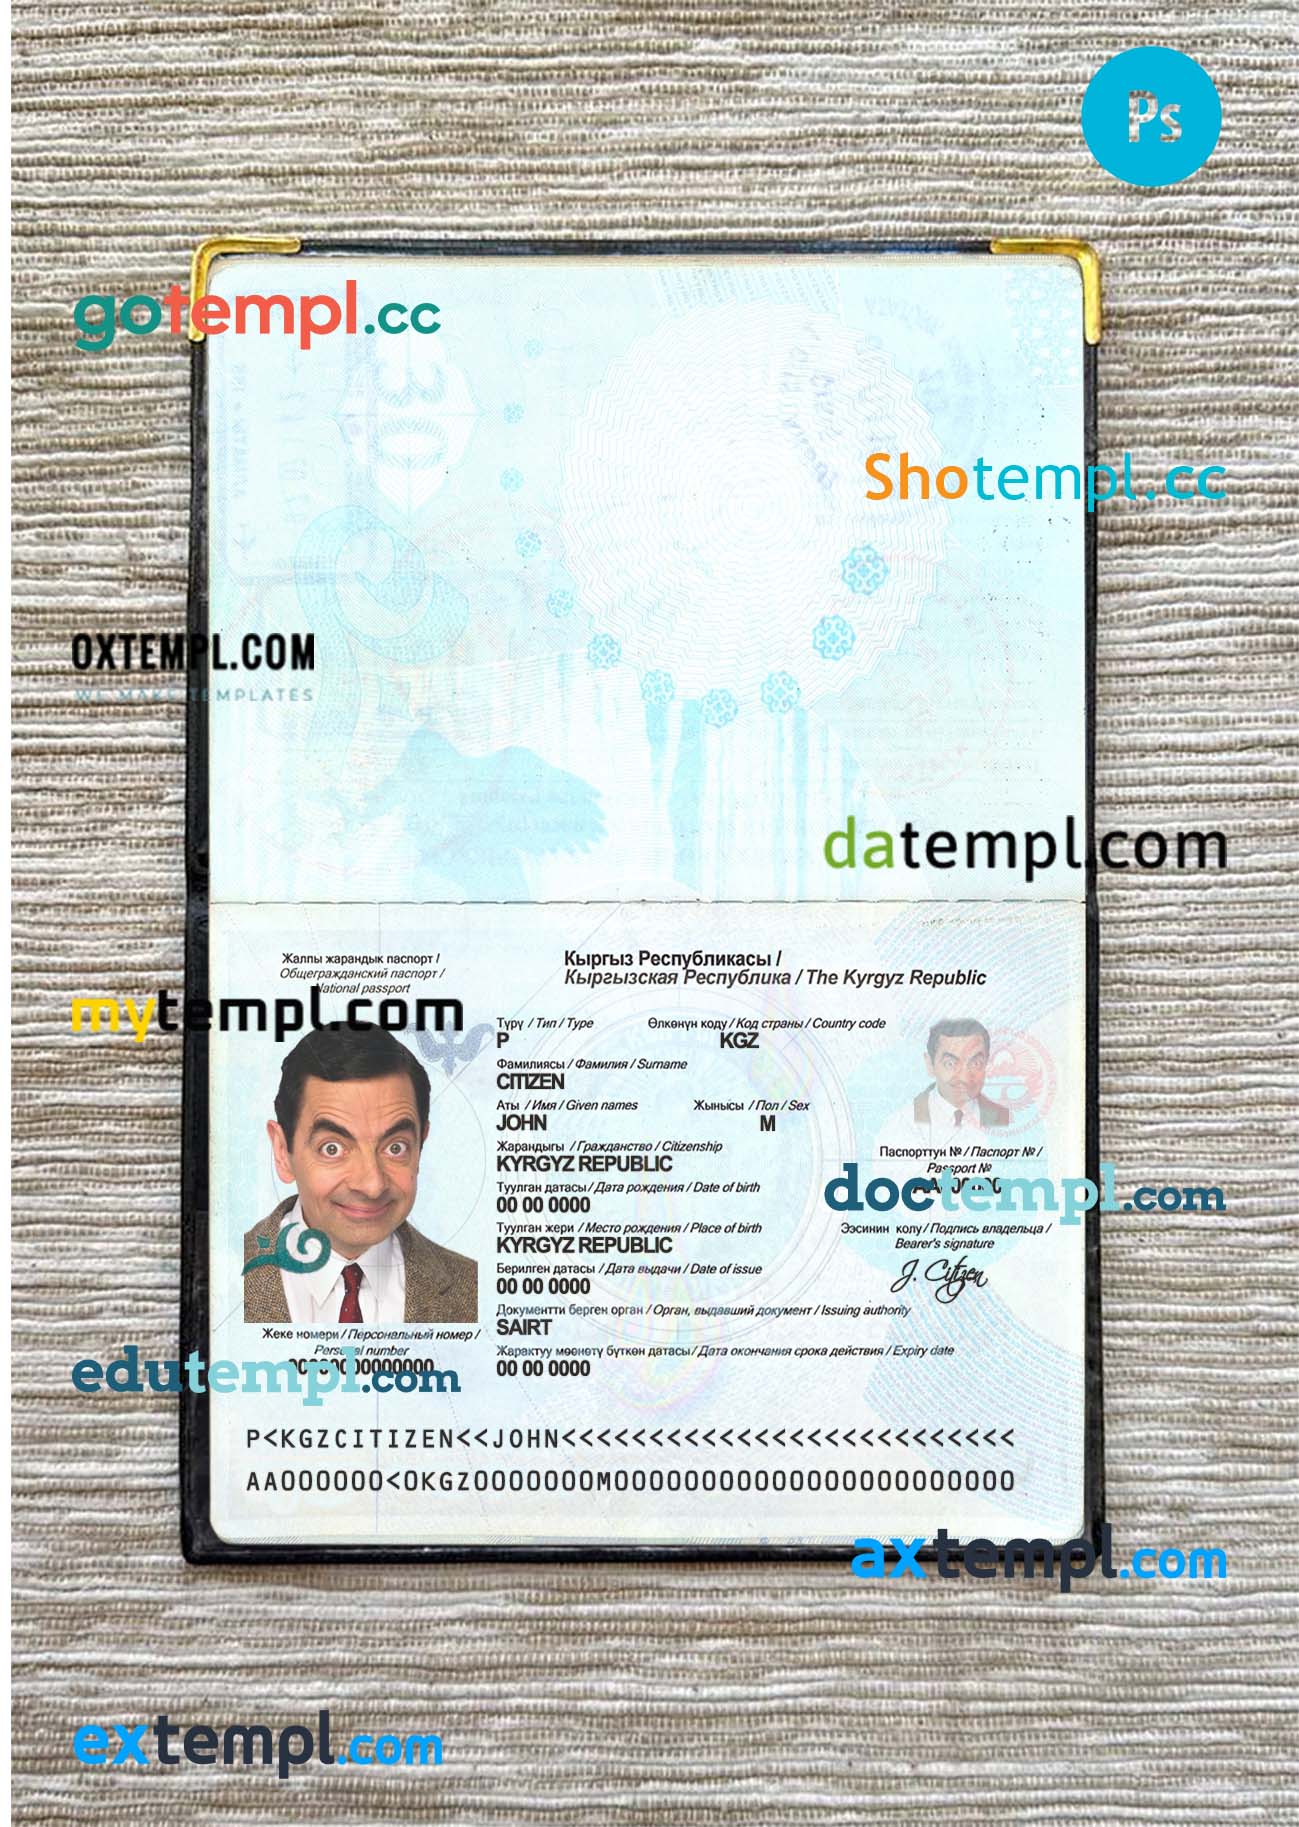 USA North Carolina driving license PSD files, scan look and photographed image, 2 in 1, under 21